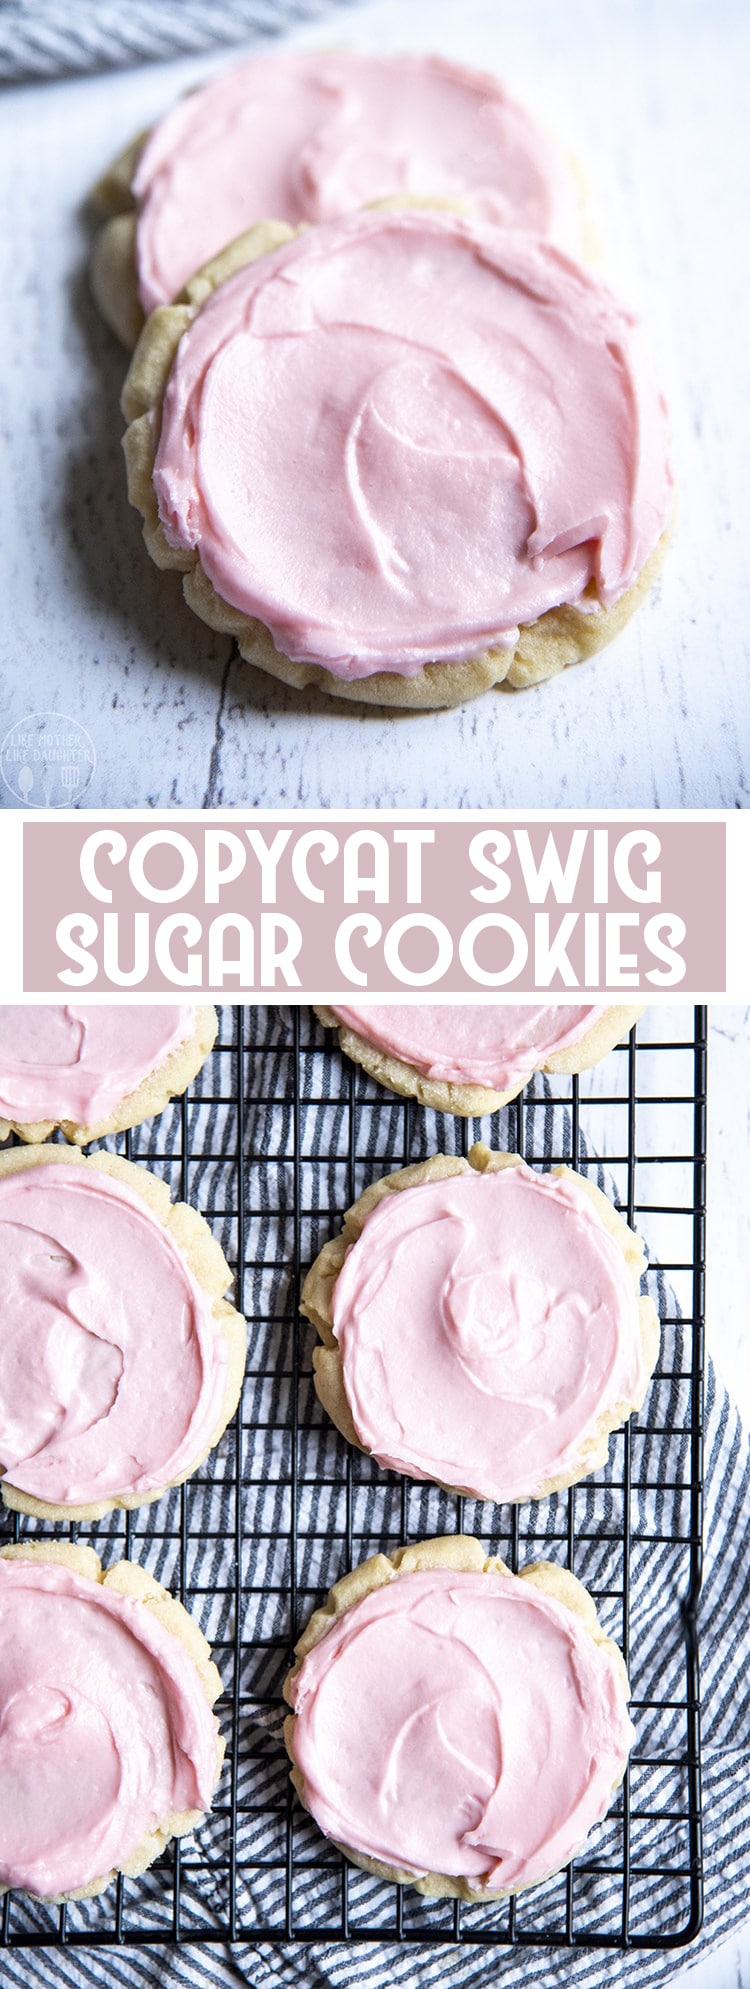 2 image collage of copycat swig sugar cookies with pink frosting separated by a title card.